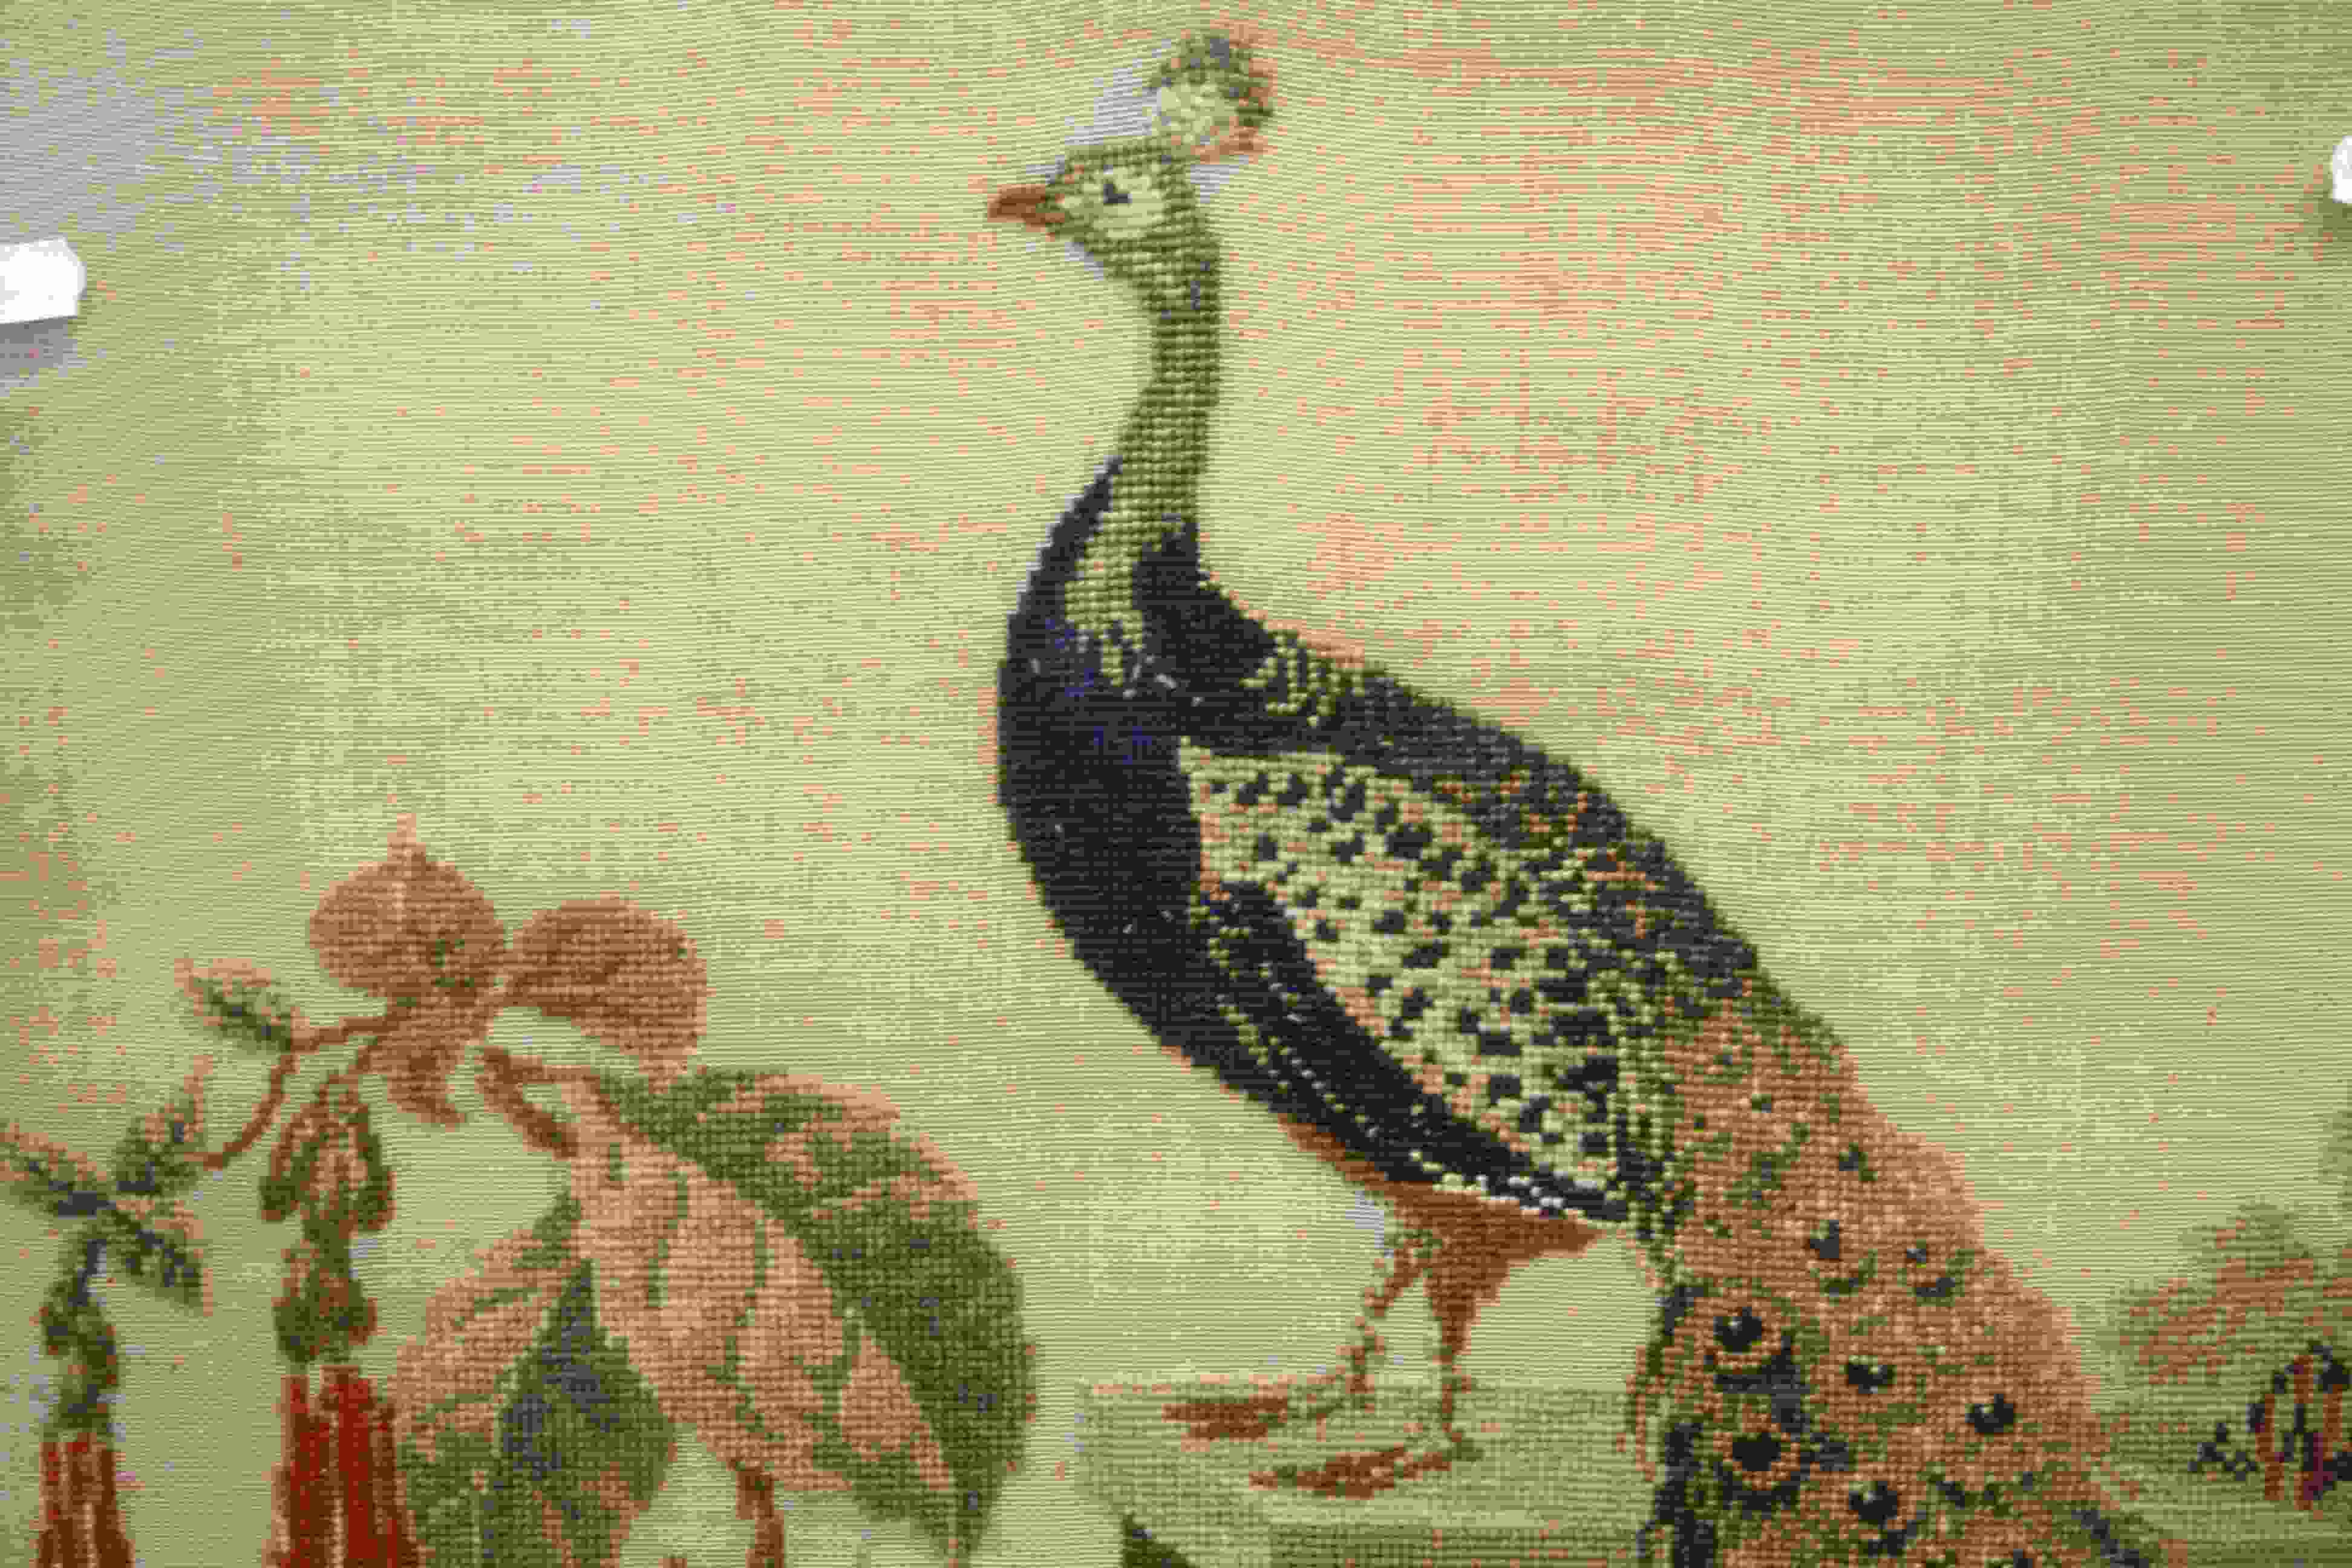 Framed and glazed tapestry of a peacock within floral scene approx. 77cm x 68cm - Image 3 of 5